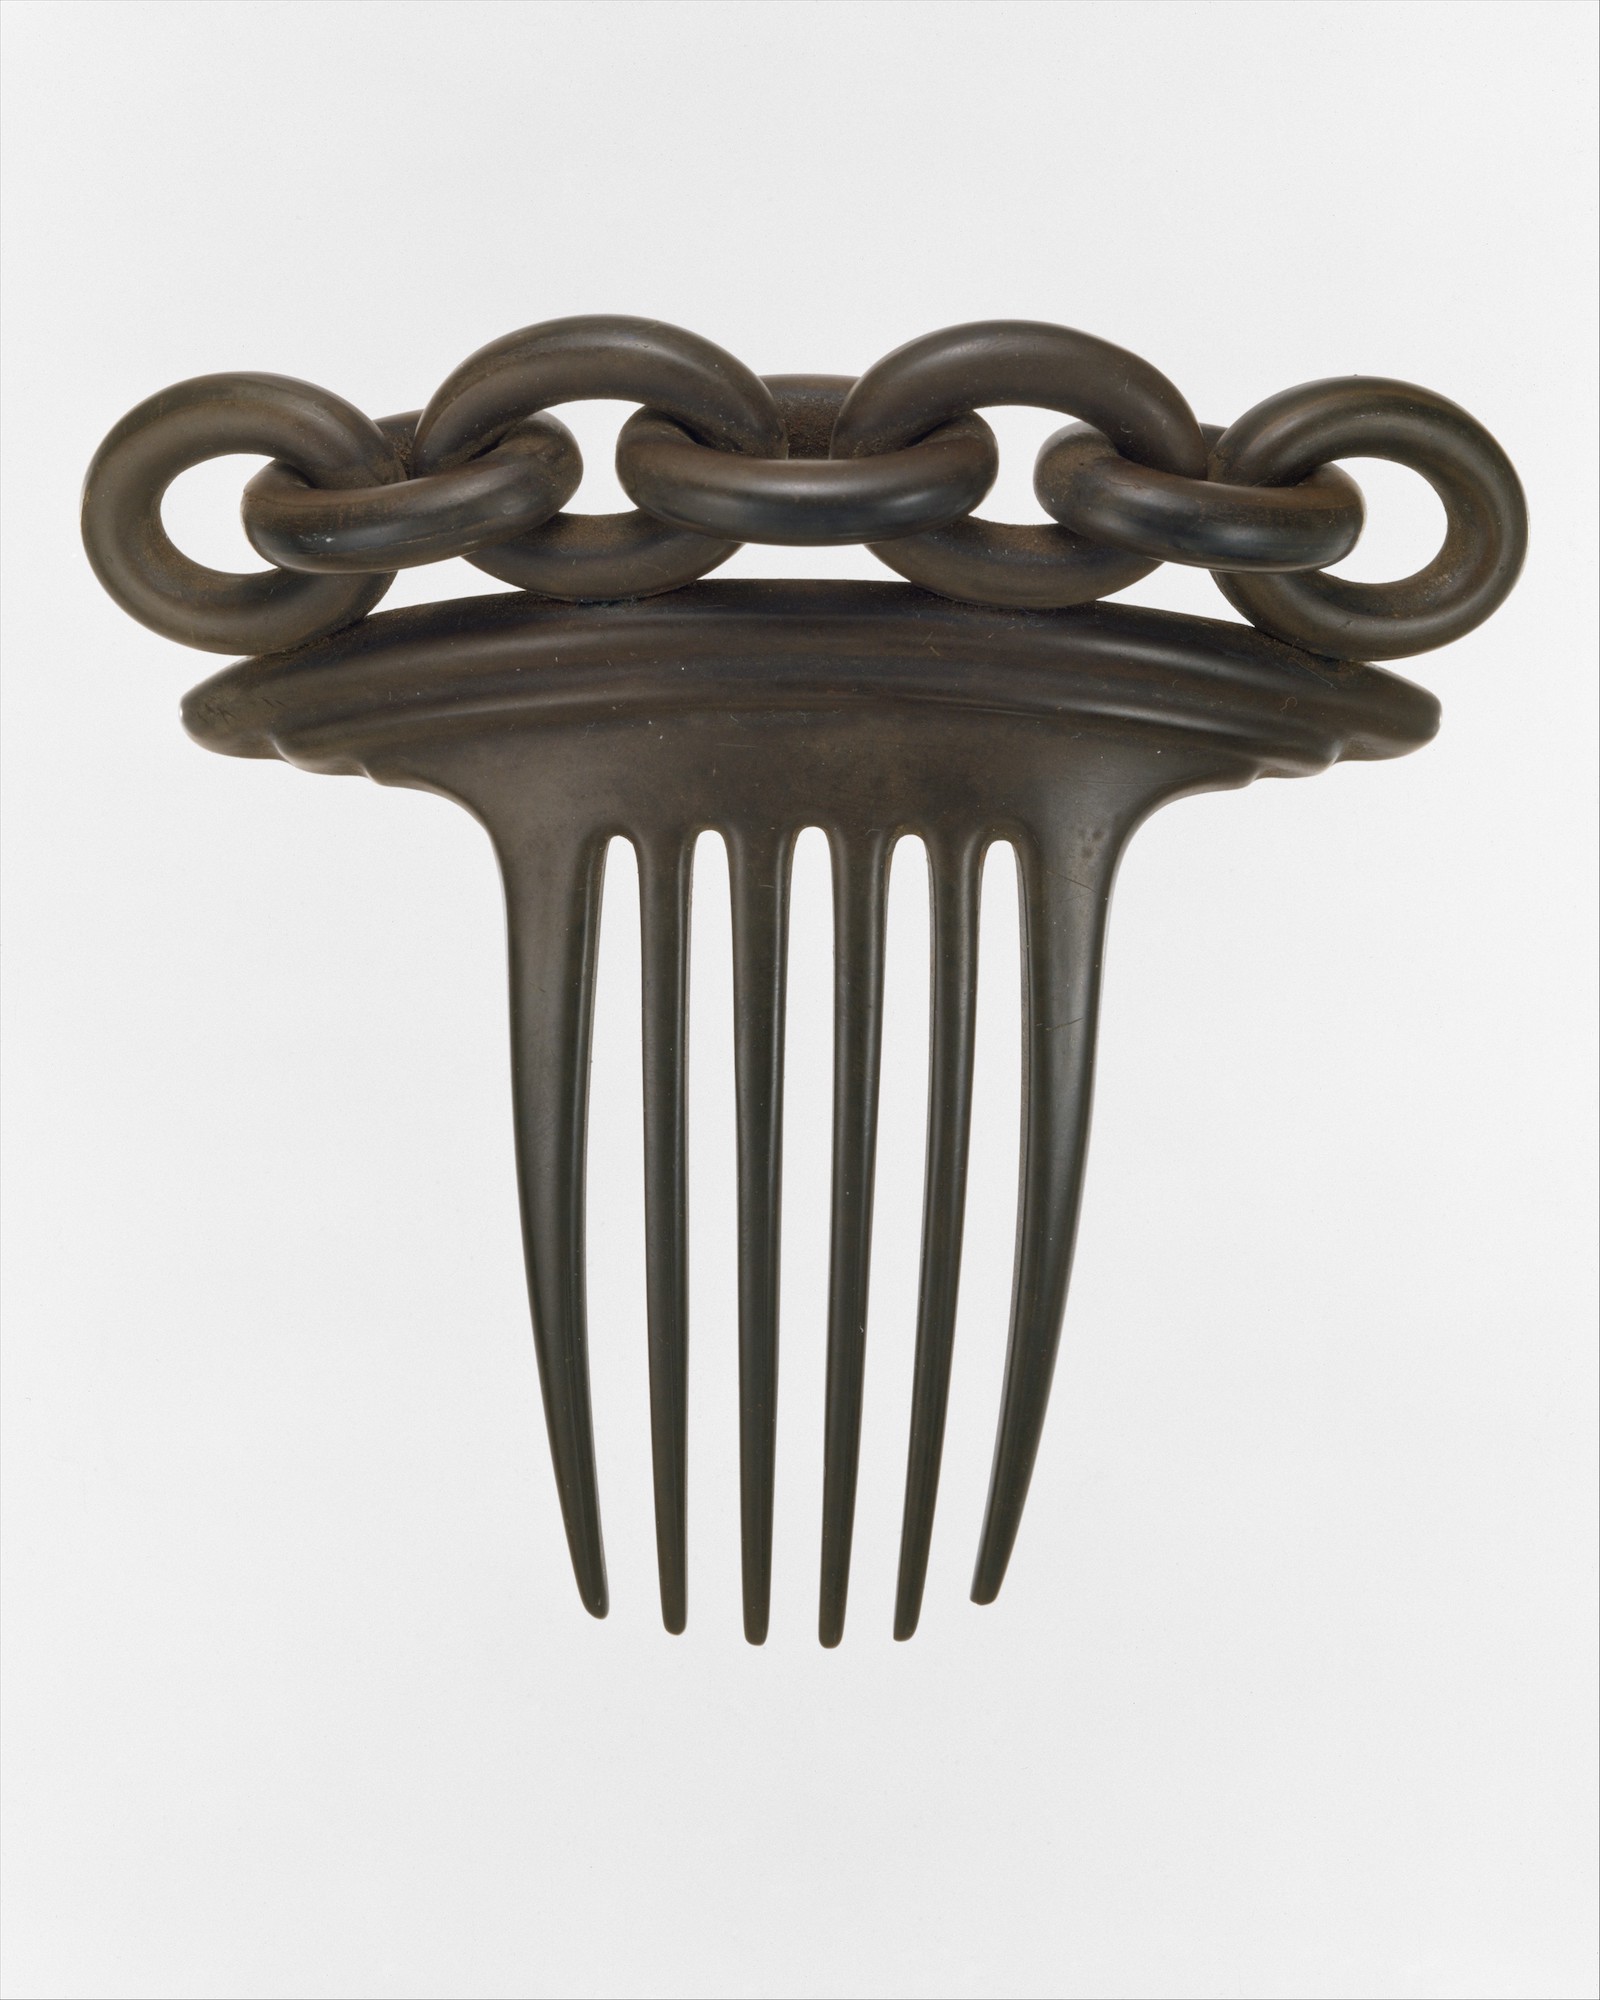 A comb with a chainlink handle, made of vulcanite, a dark brown substance.